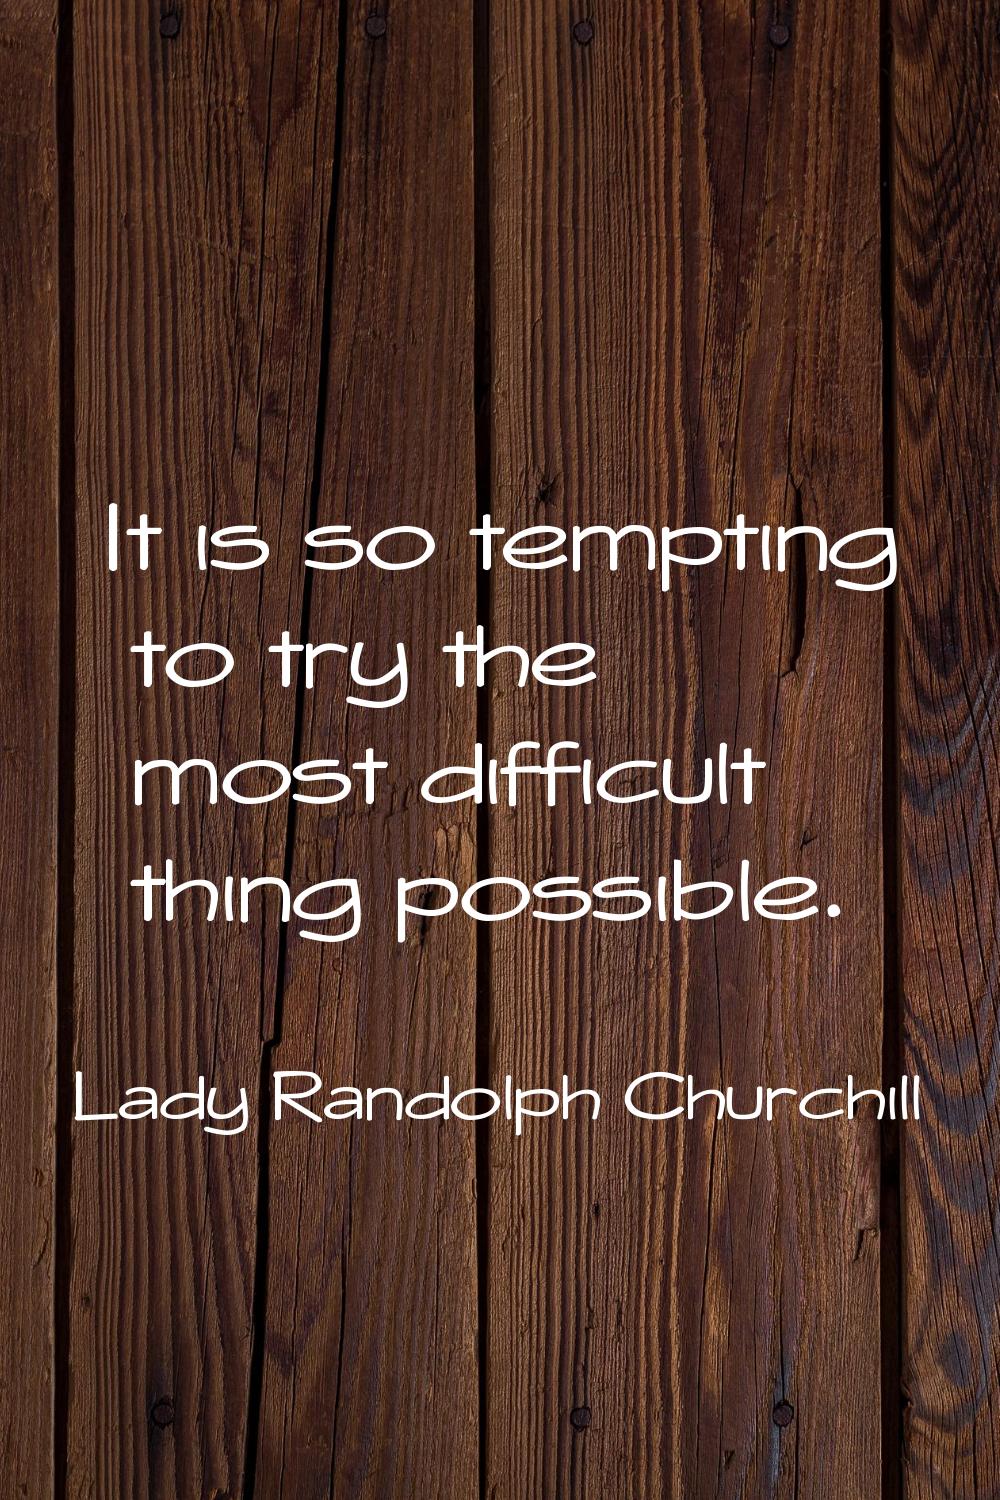 It is so tempting to try the most difficult thing possible.